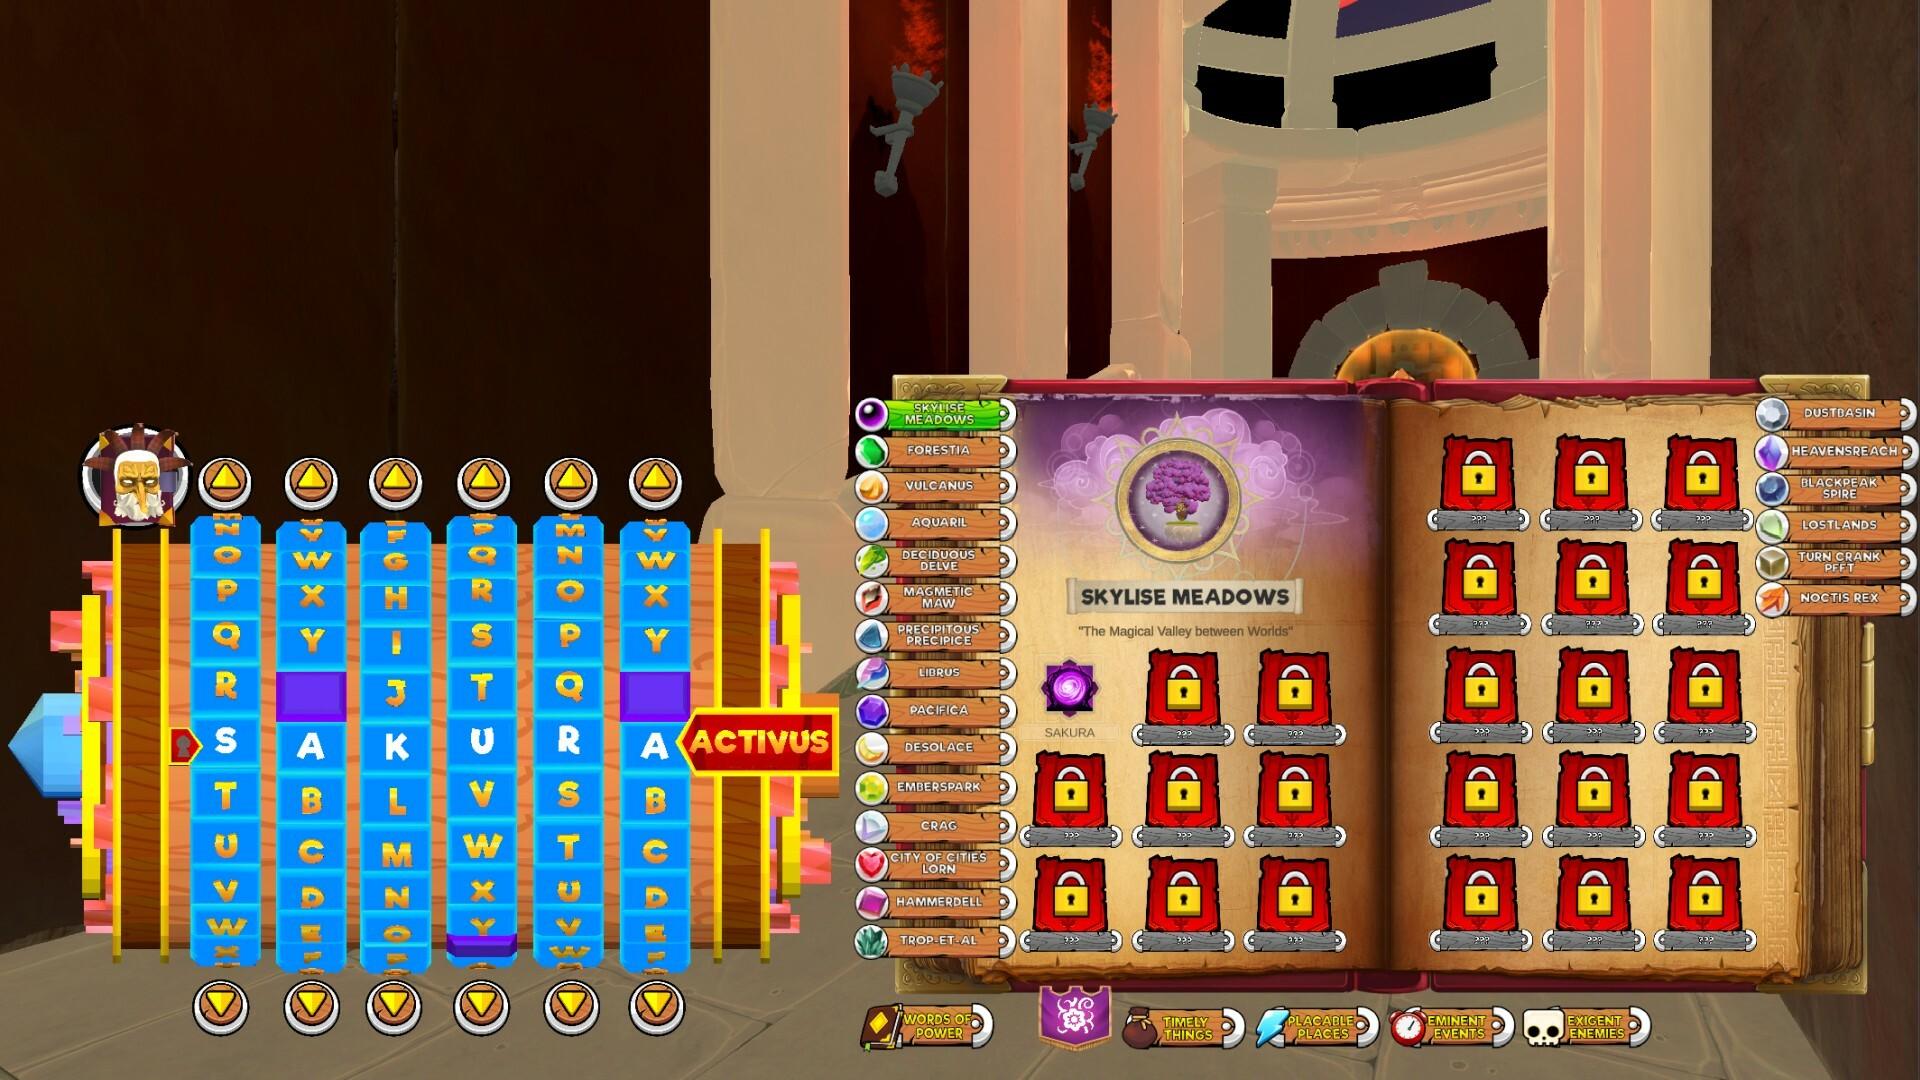 Screenshot of Mad King's Lair: Tome of Destruction